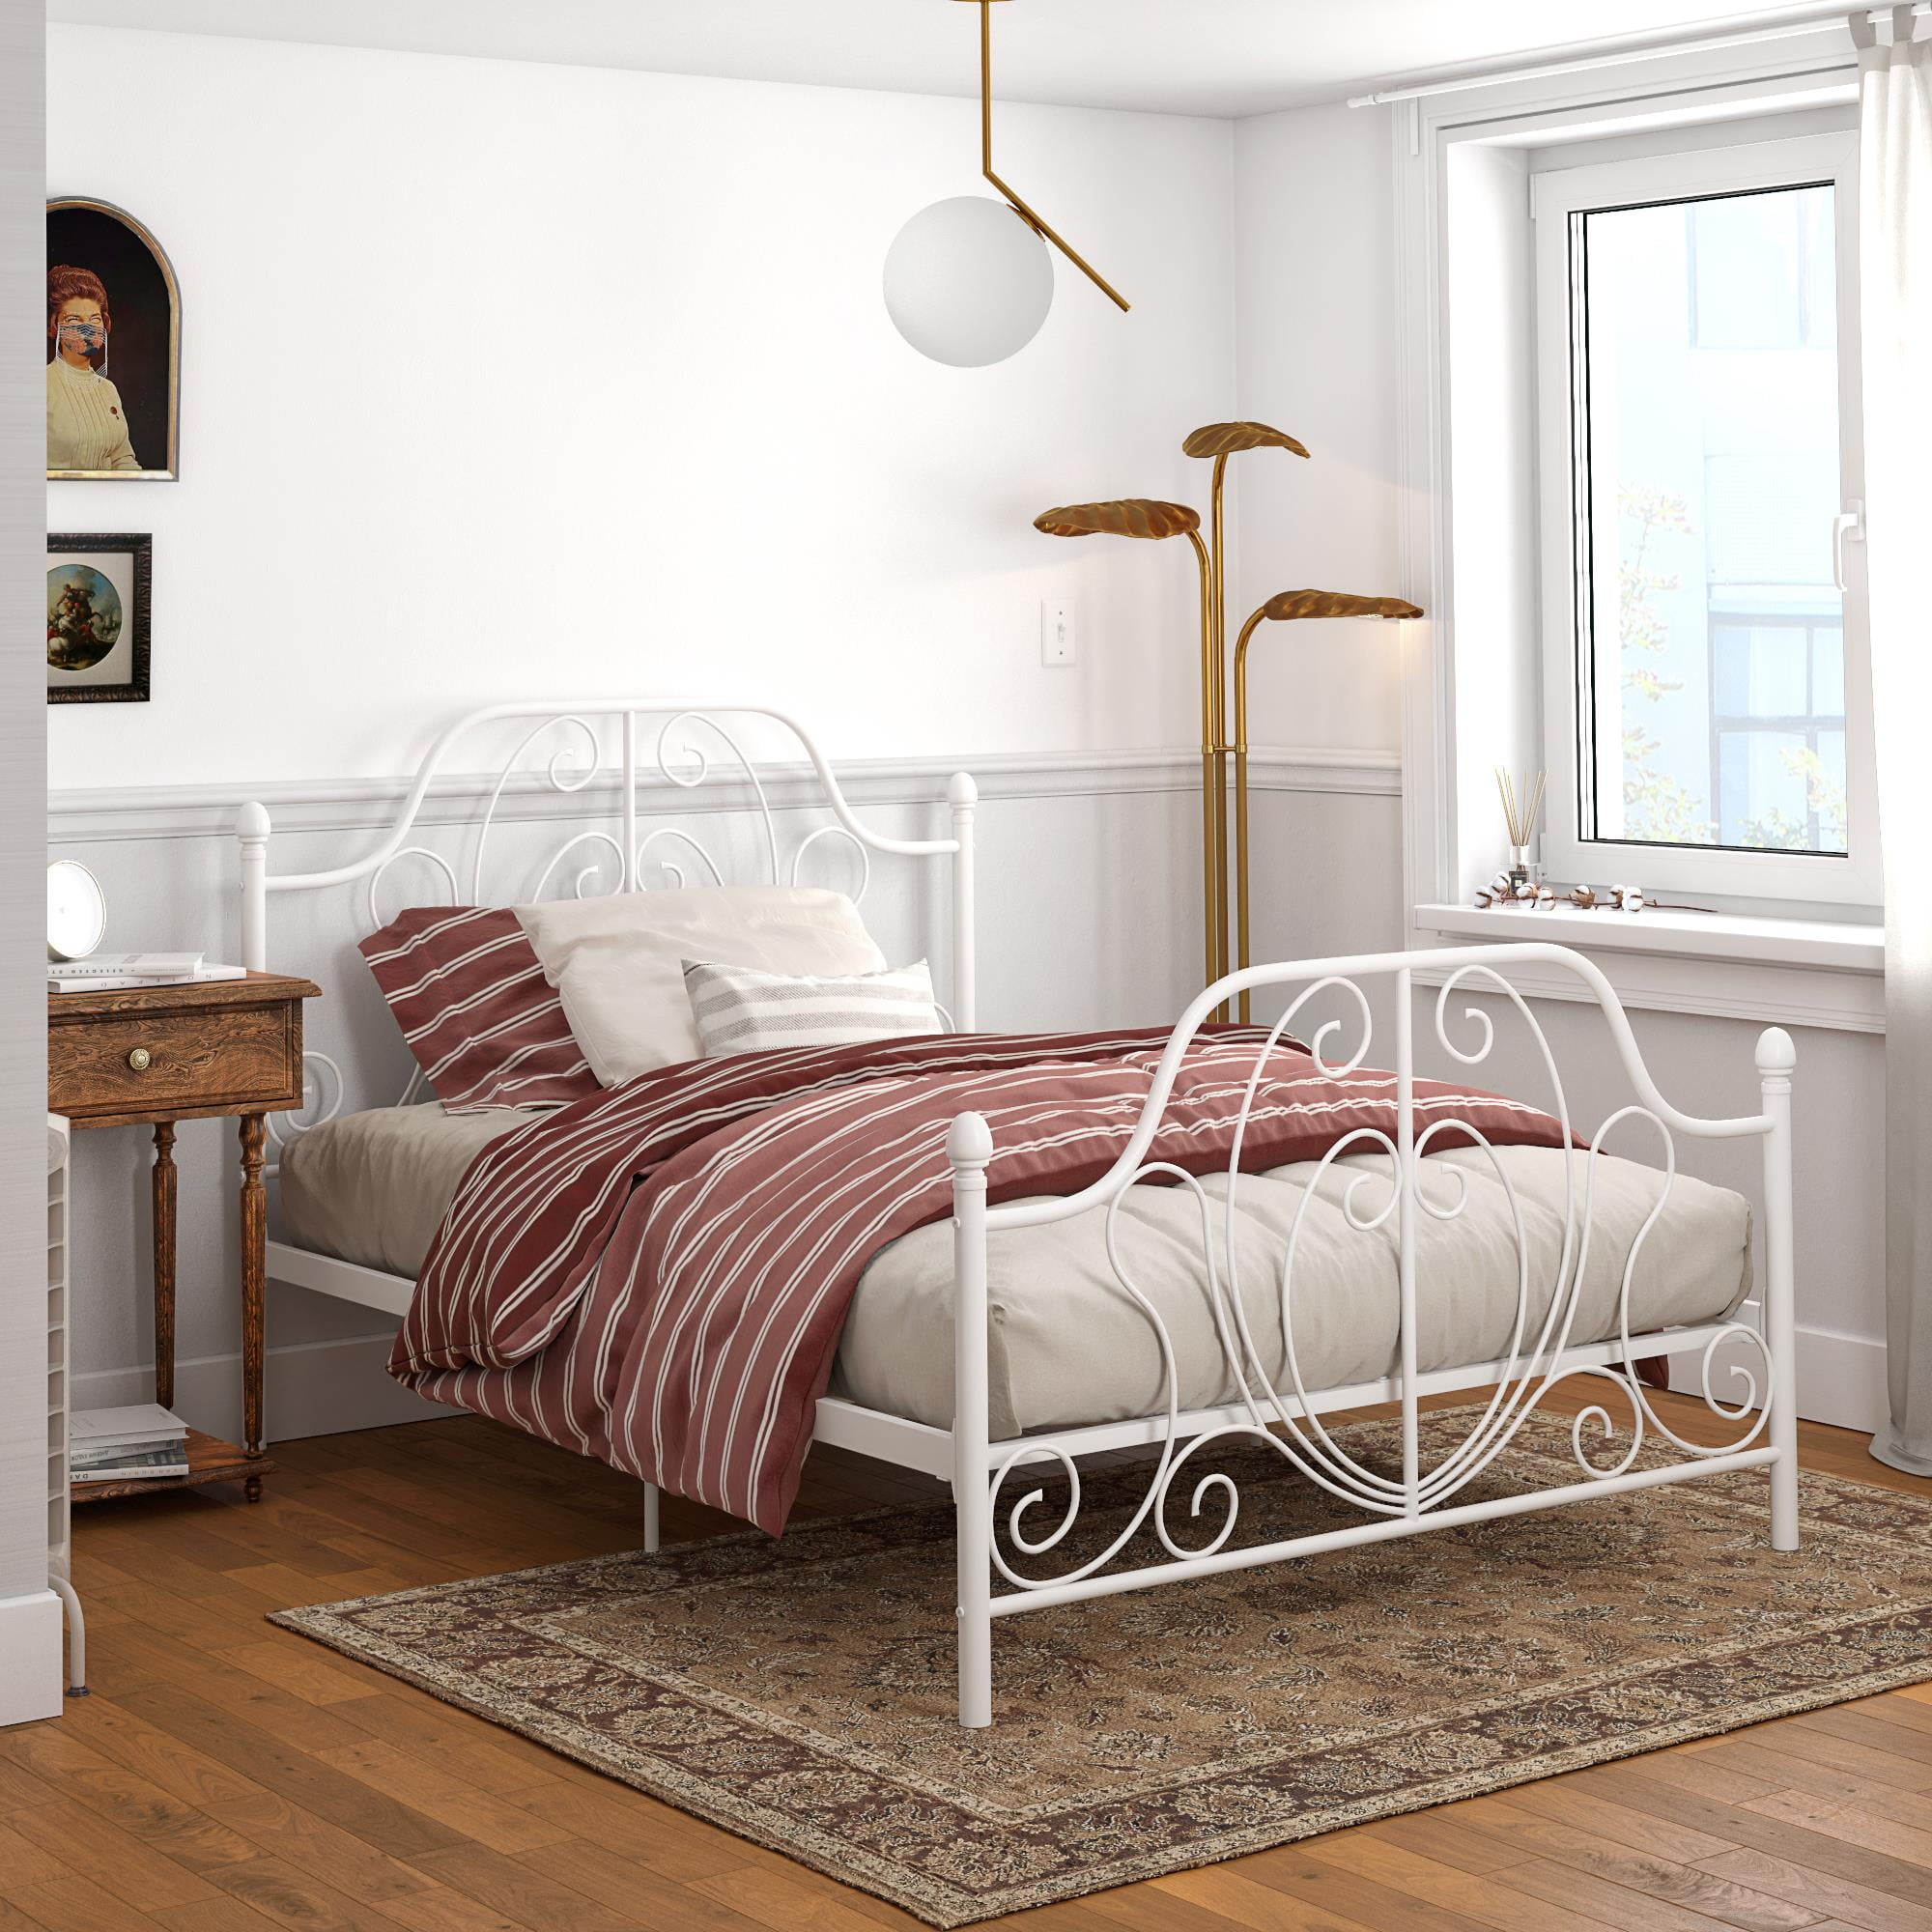 Affordable Metal Bed Frames For Budget conscious Buyers